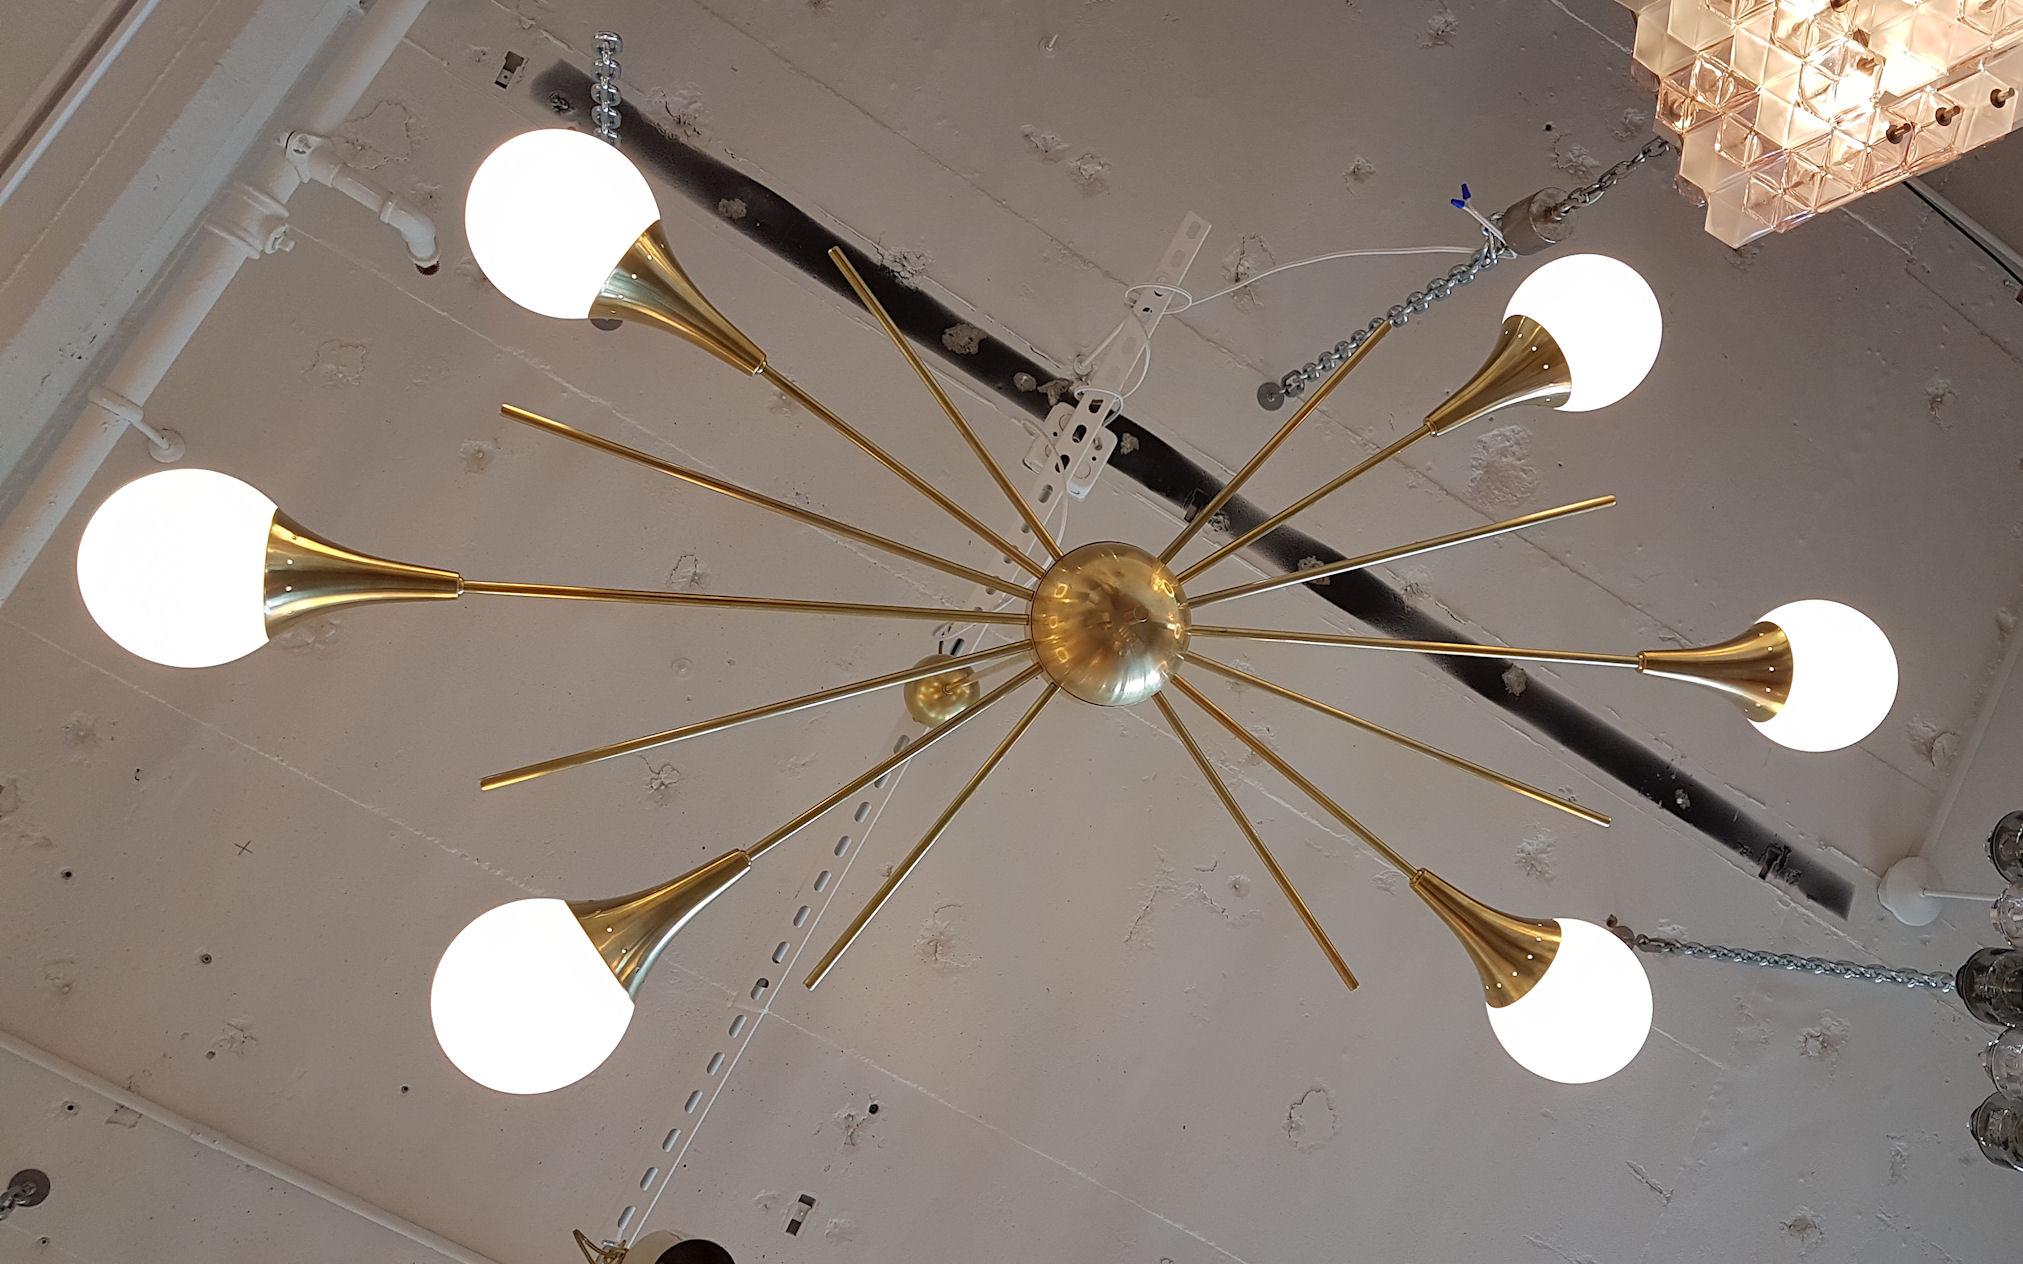 Mid-Century Modern Italian, Stilnovo style, six-arm brass and six white glass globes, Sputnik chandelier.
Made of a brass centre ball, with six brass tubes at the same height on each side.
Beautiful patina on the brass.
The height is adjustable